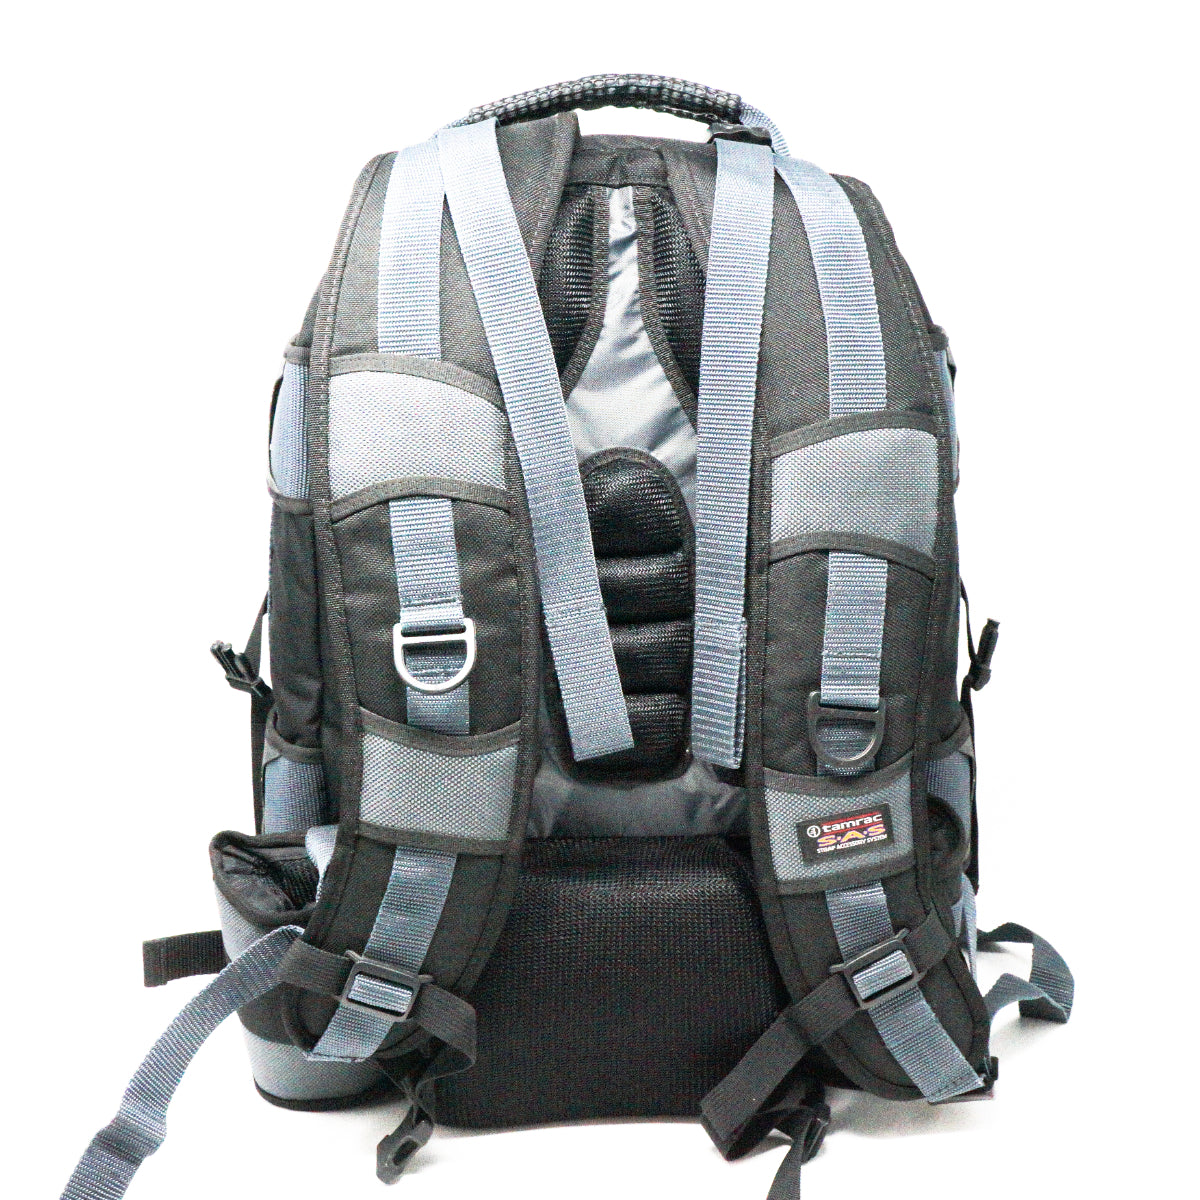 Used Tamrac Expedition 7X Equipment Backpack